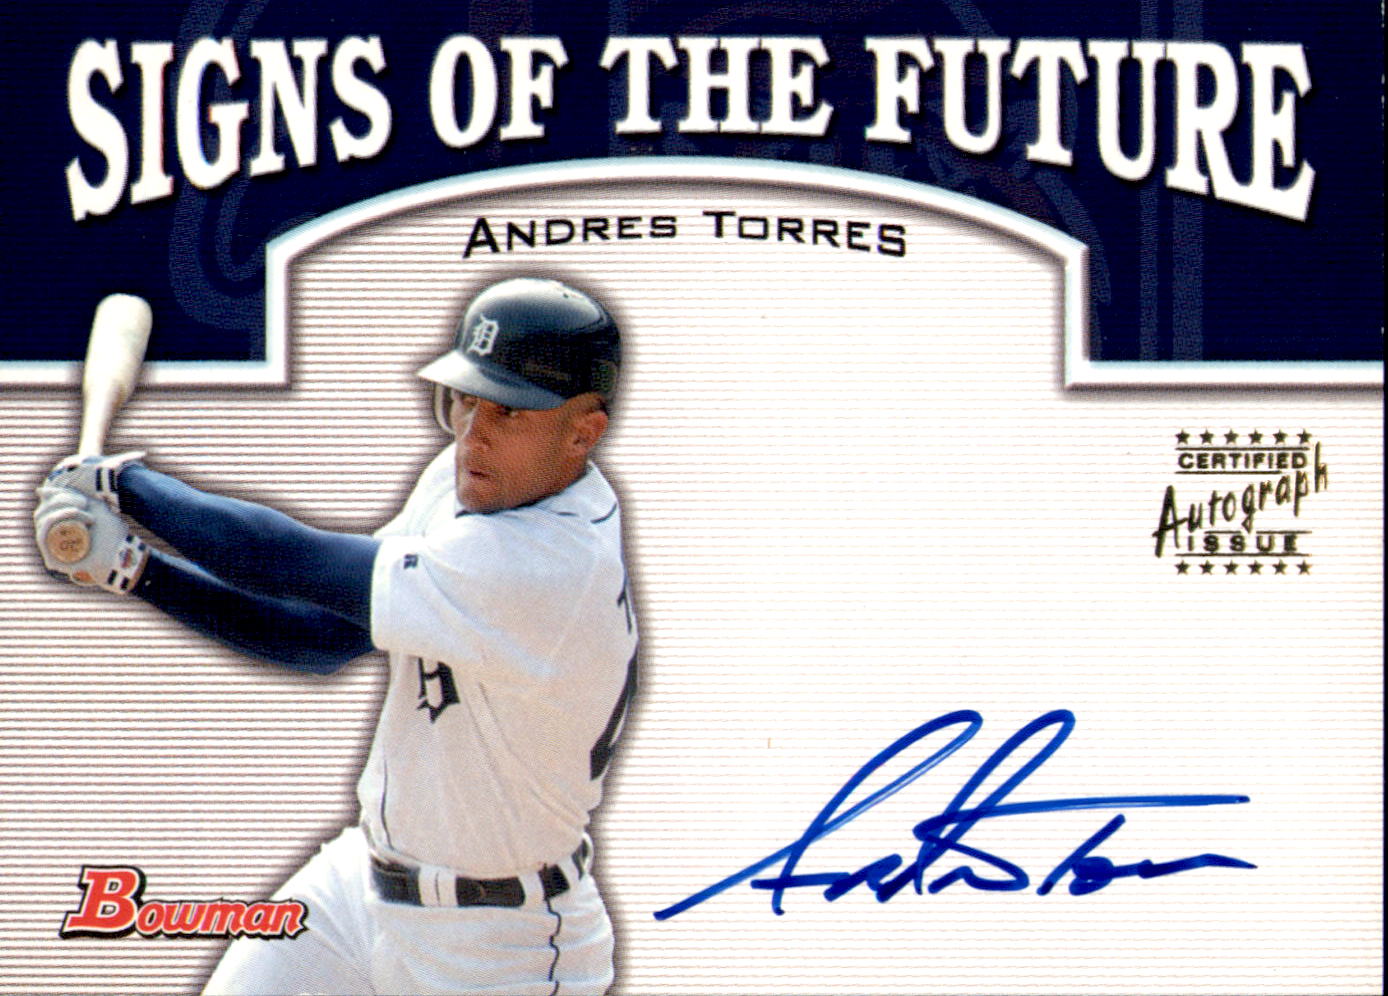 2003 Bowman Draft Signs of the Future #AT Andres Torres A